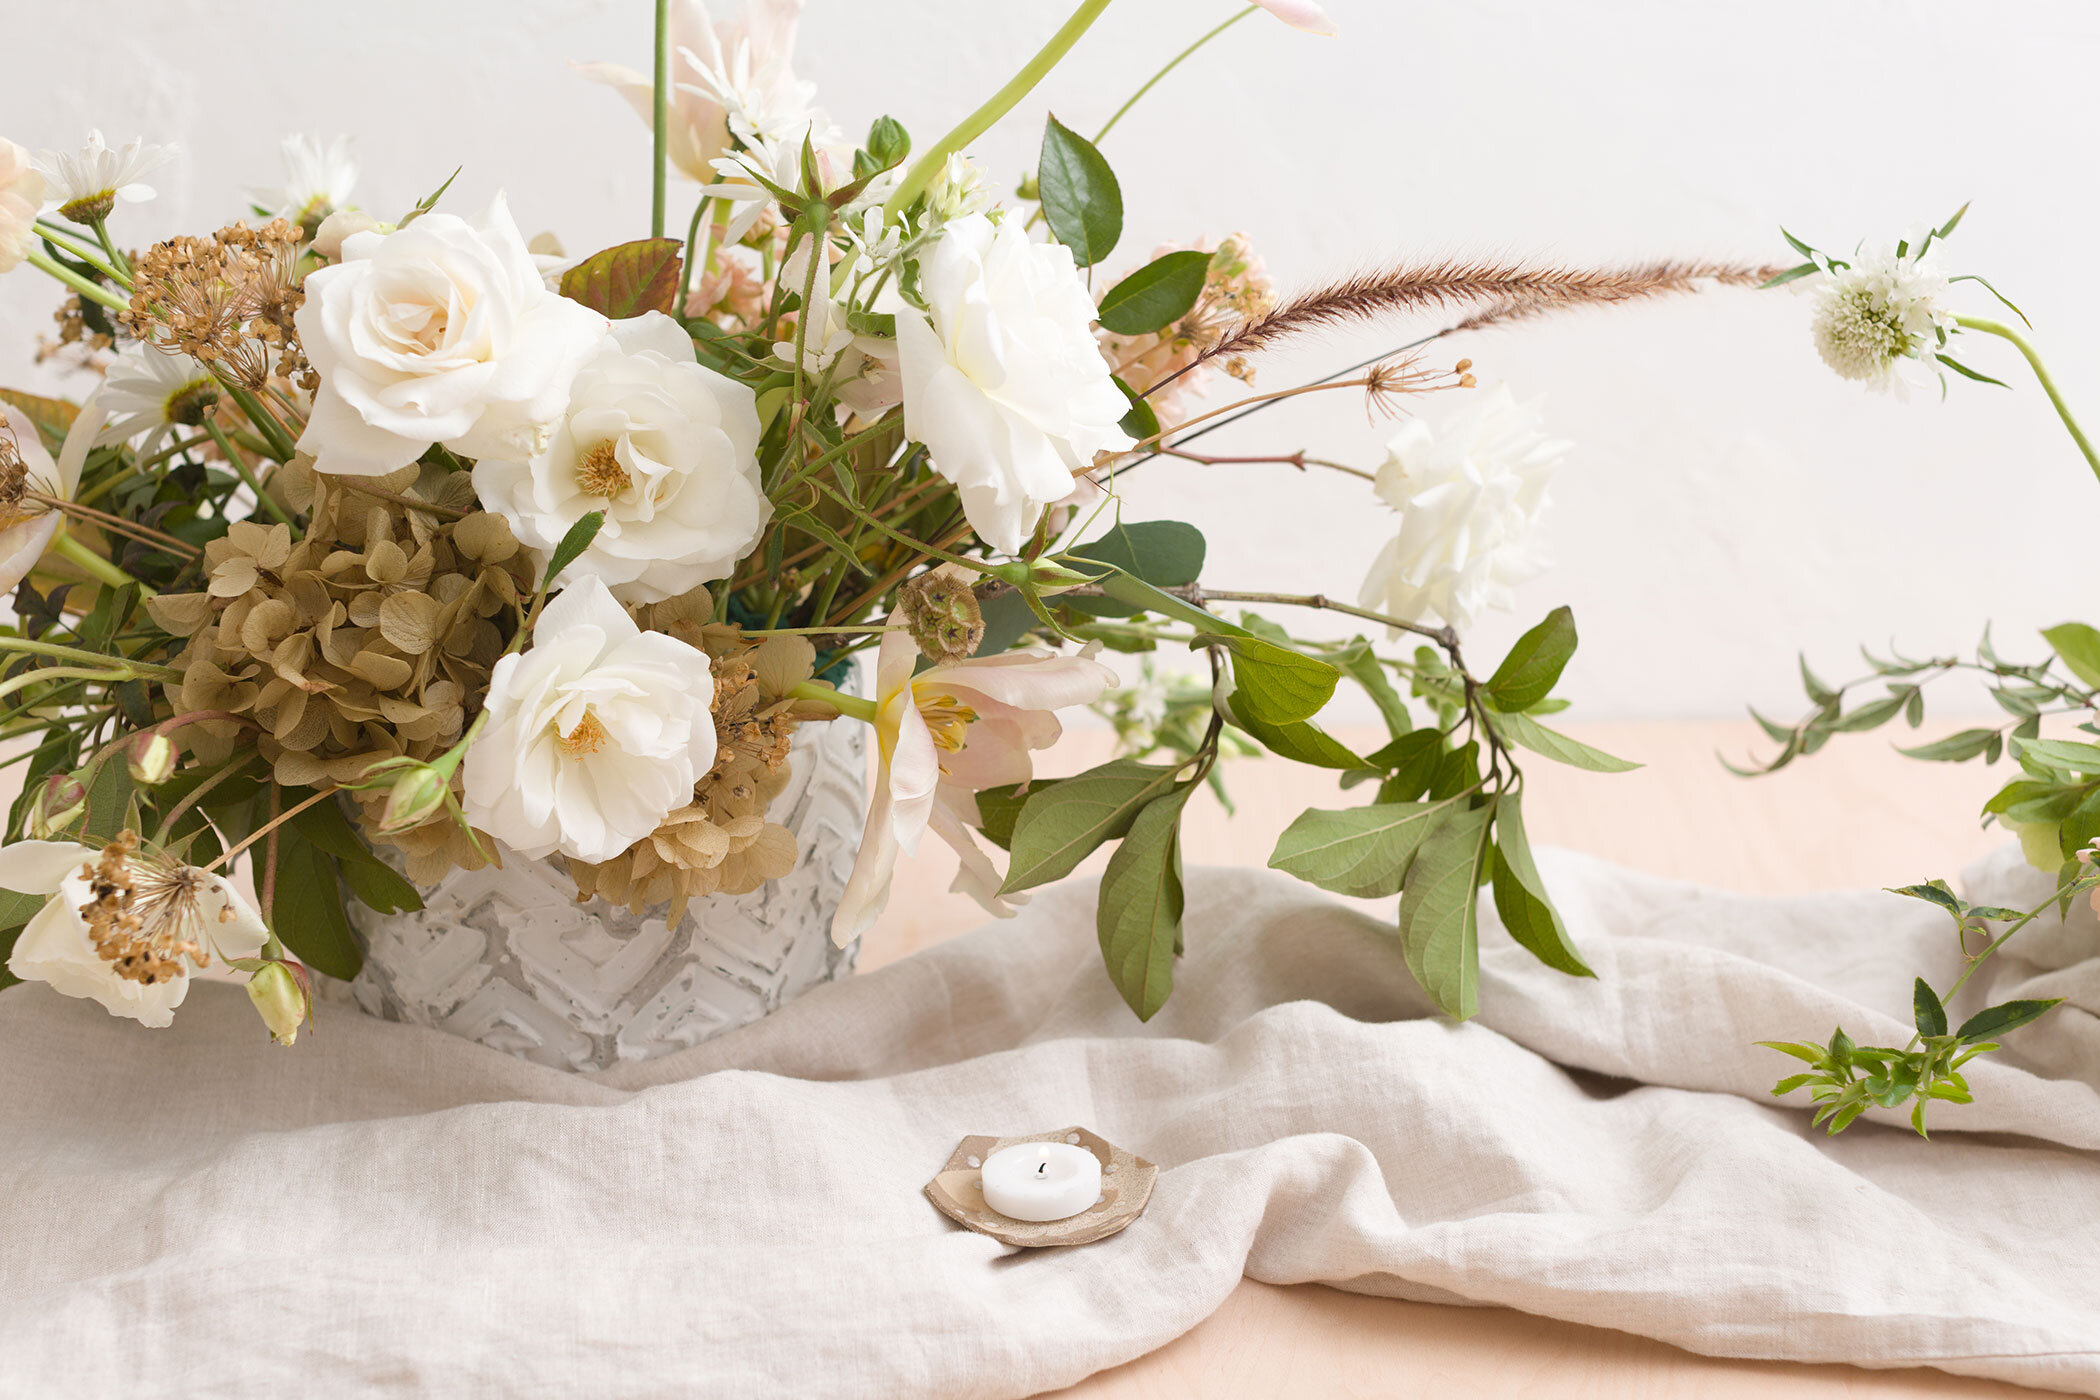 Posies-Floral-Co-Wedding-And-Events-Centerpiece.jpg